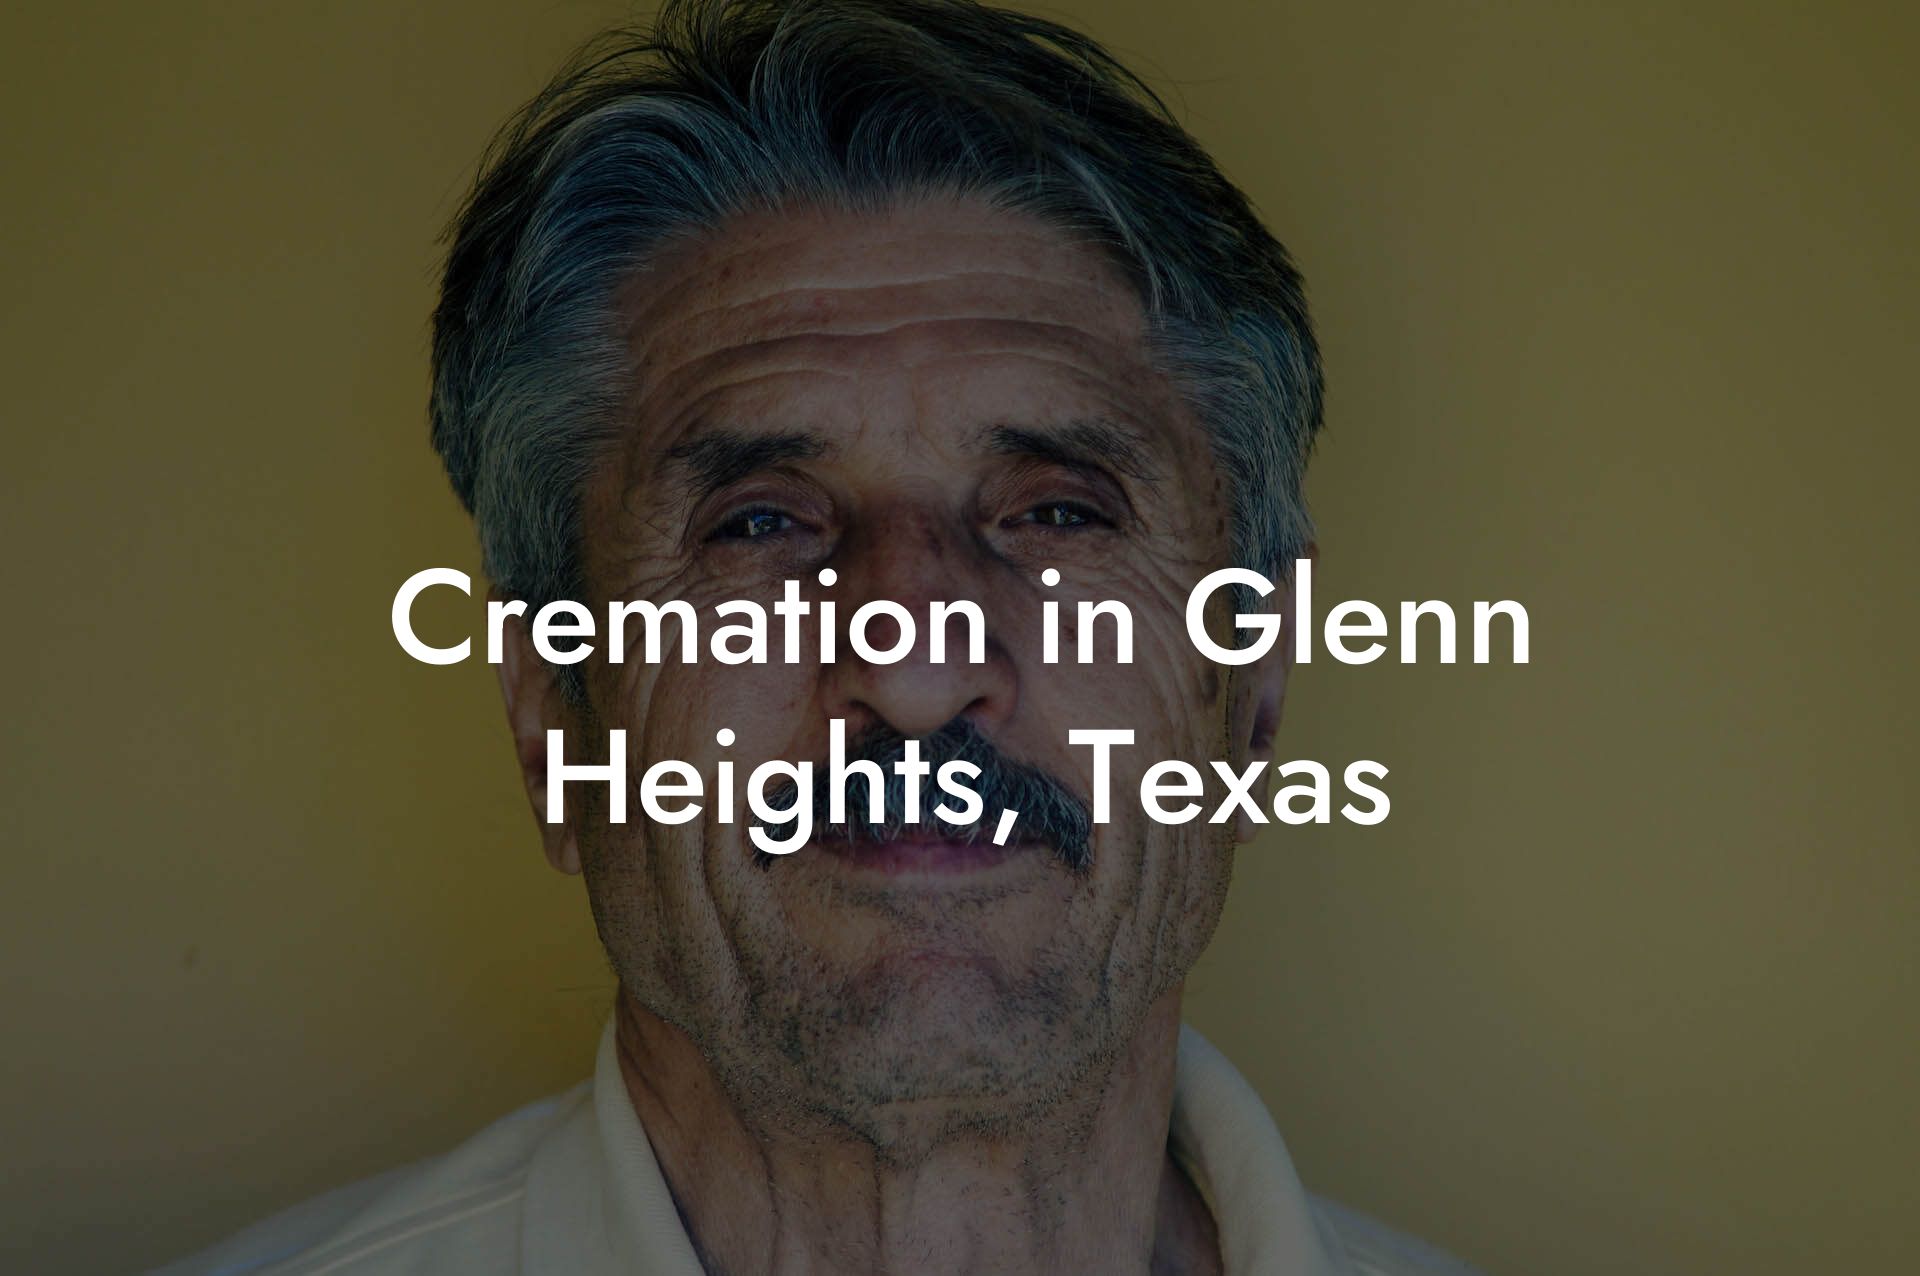 Cremation in Glenn Heights, Texas